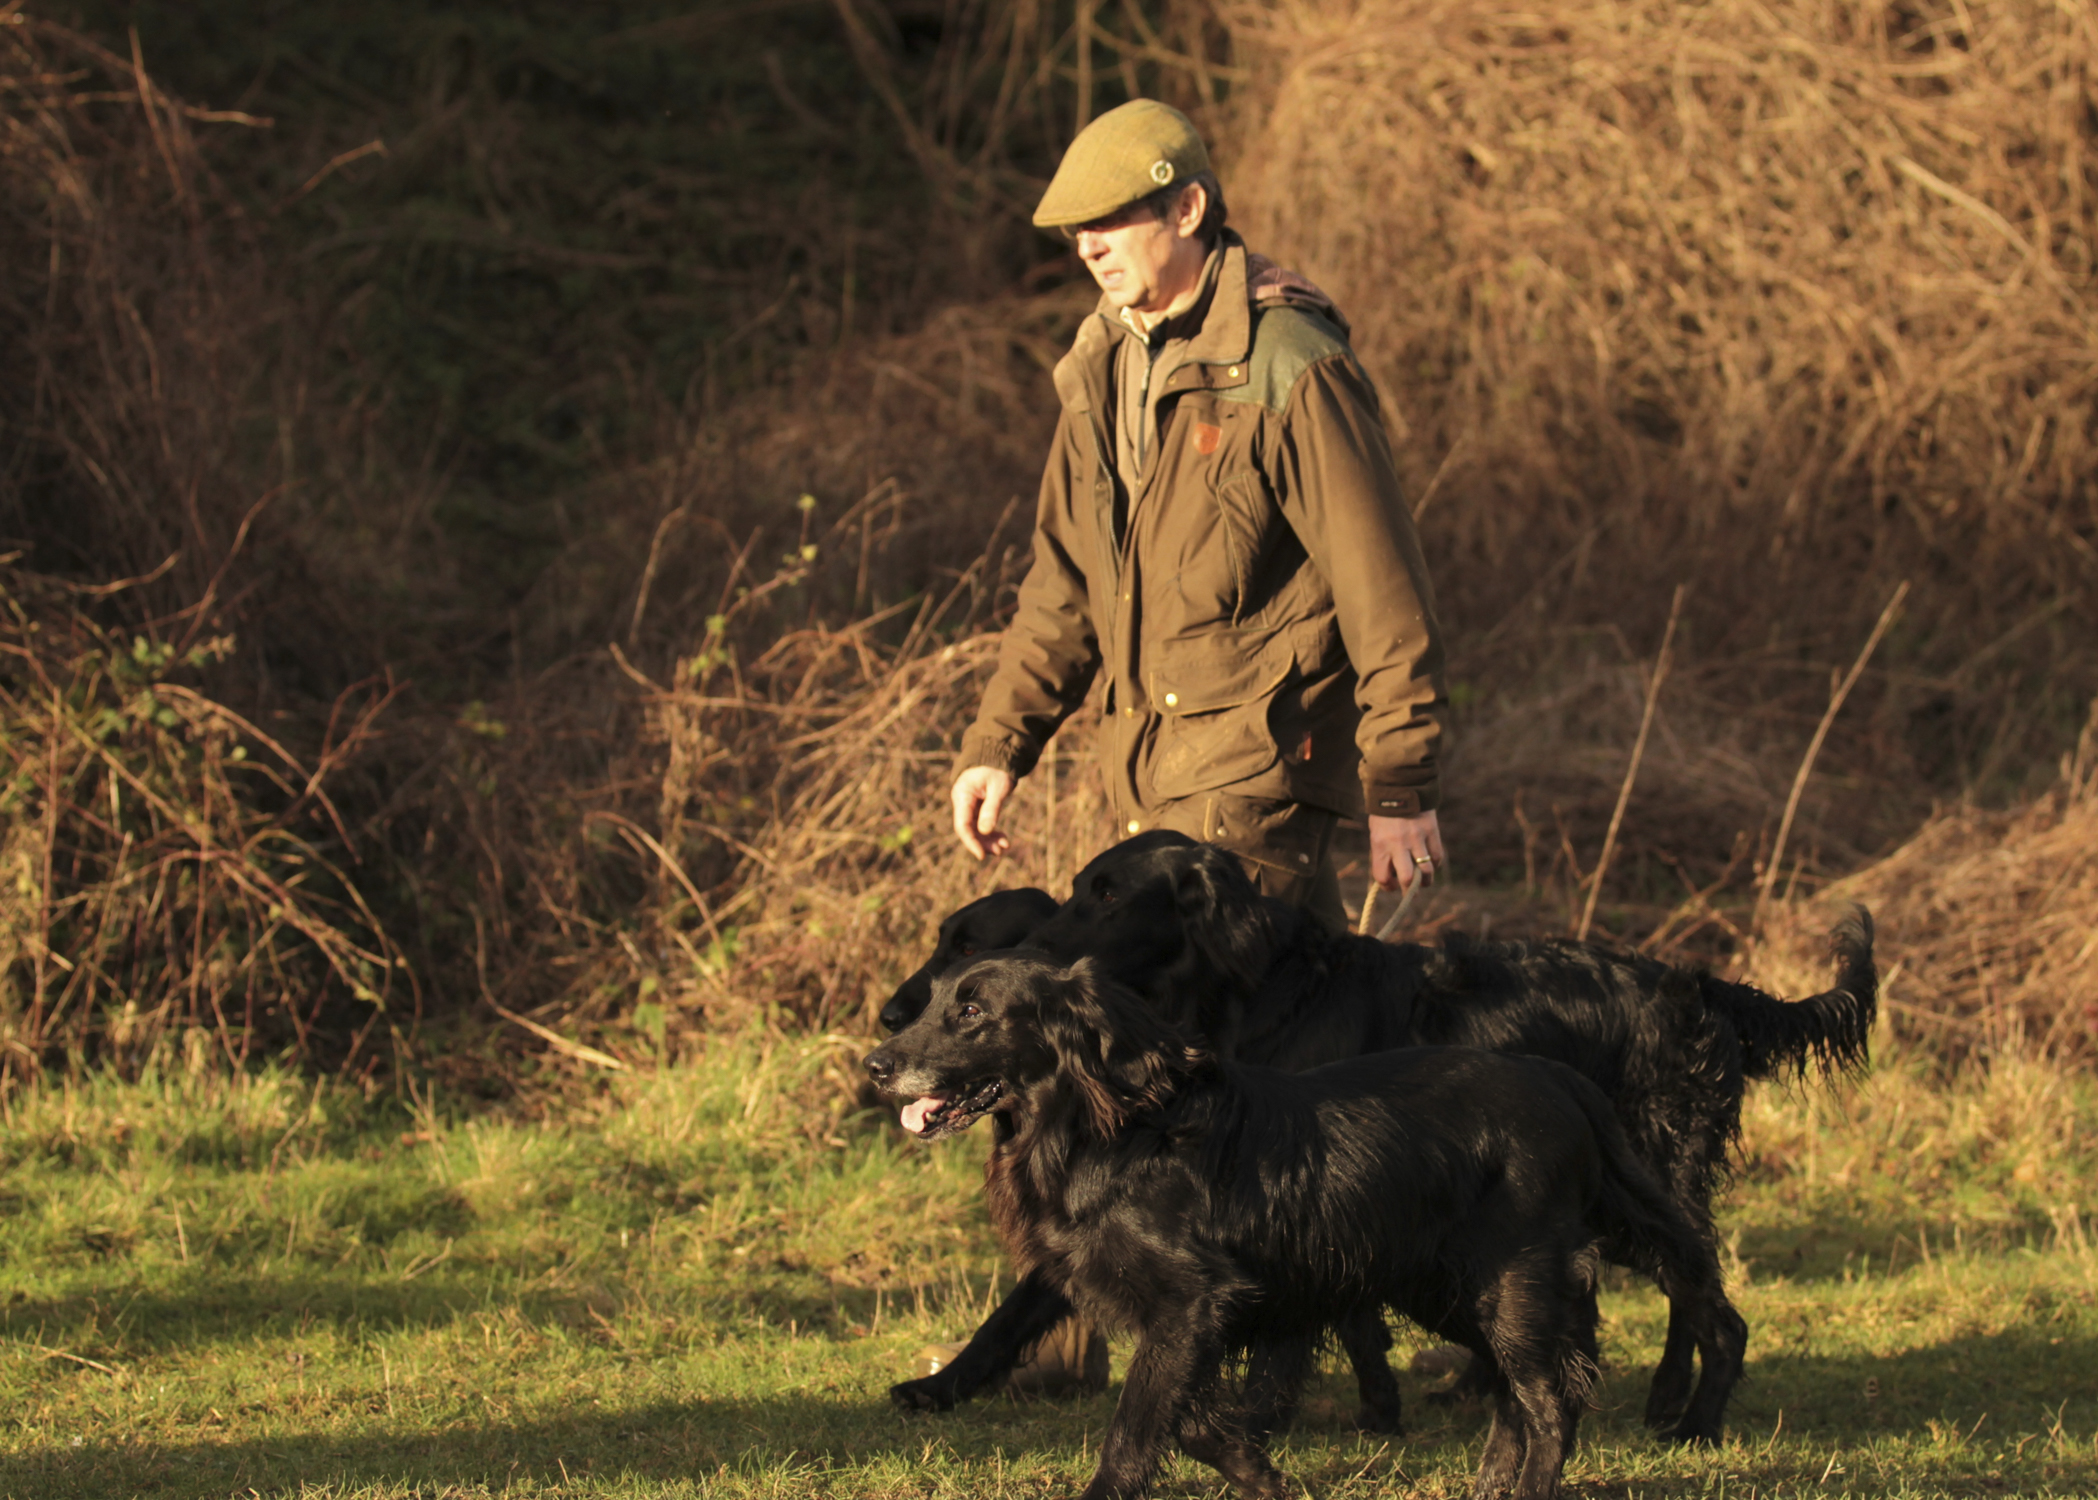 James Potter and his gundogs